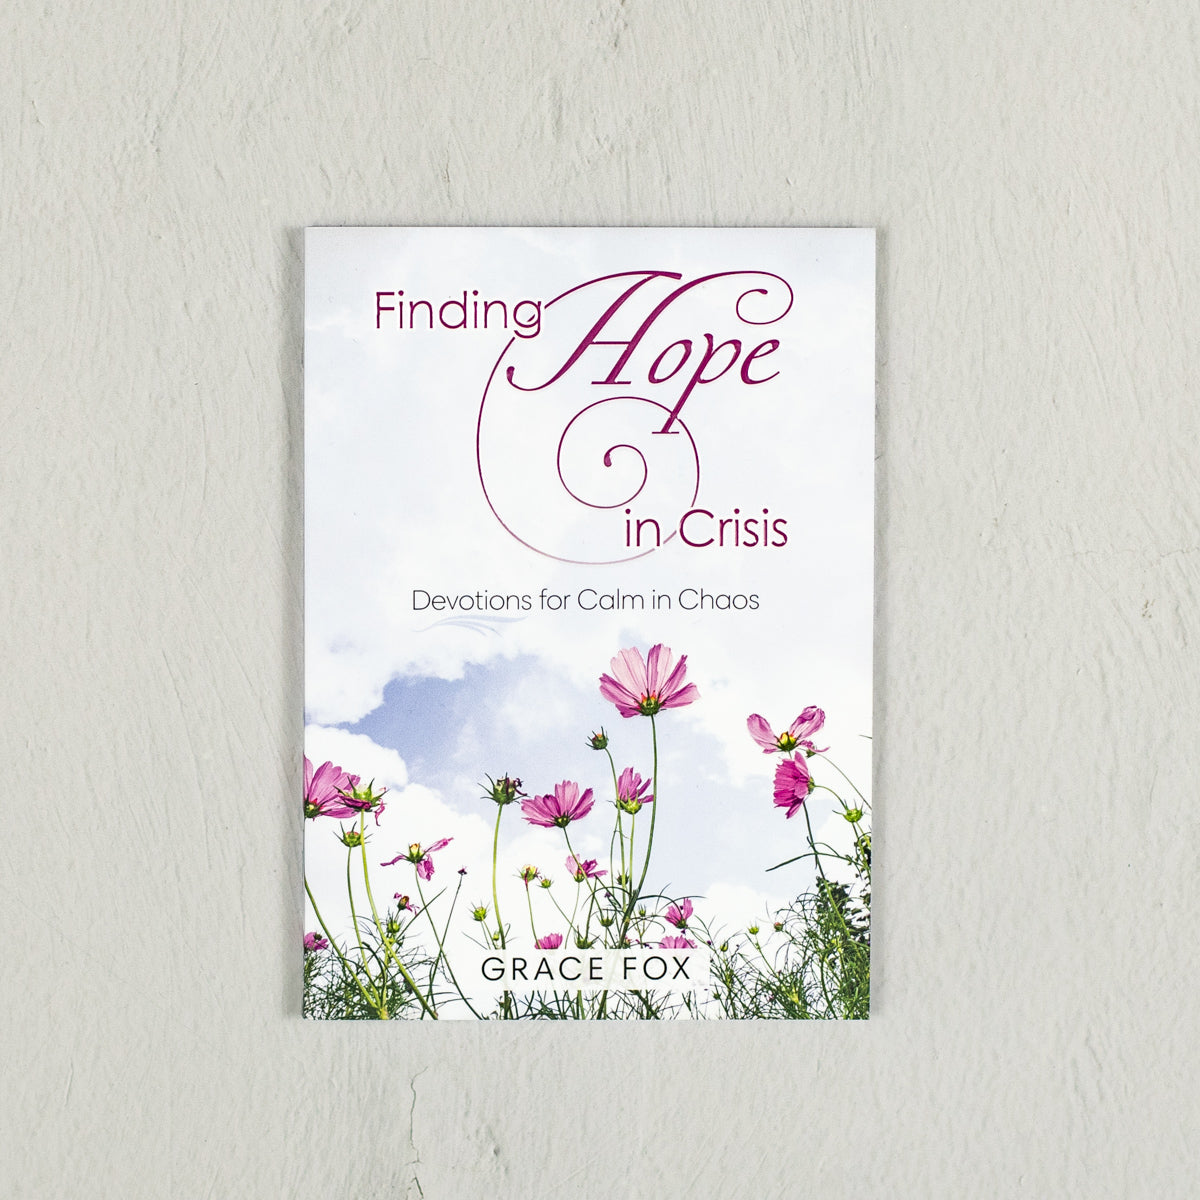 Finding Hope in Crisis: Devotions for Calm in Chaos by Grace Fox